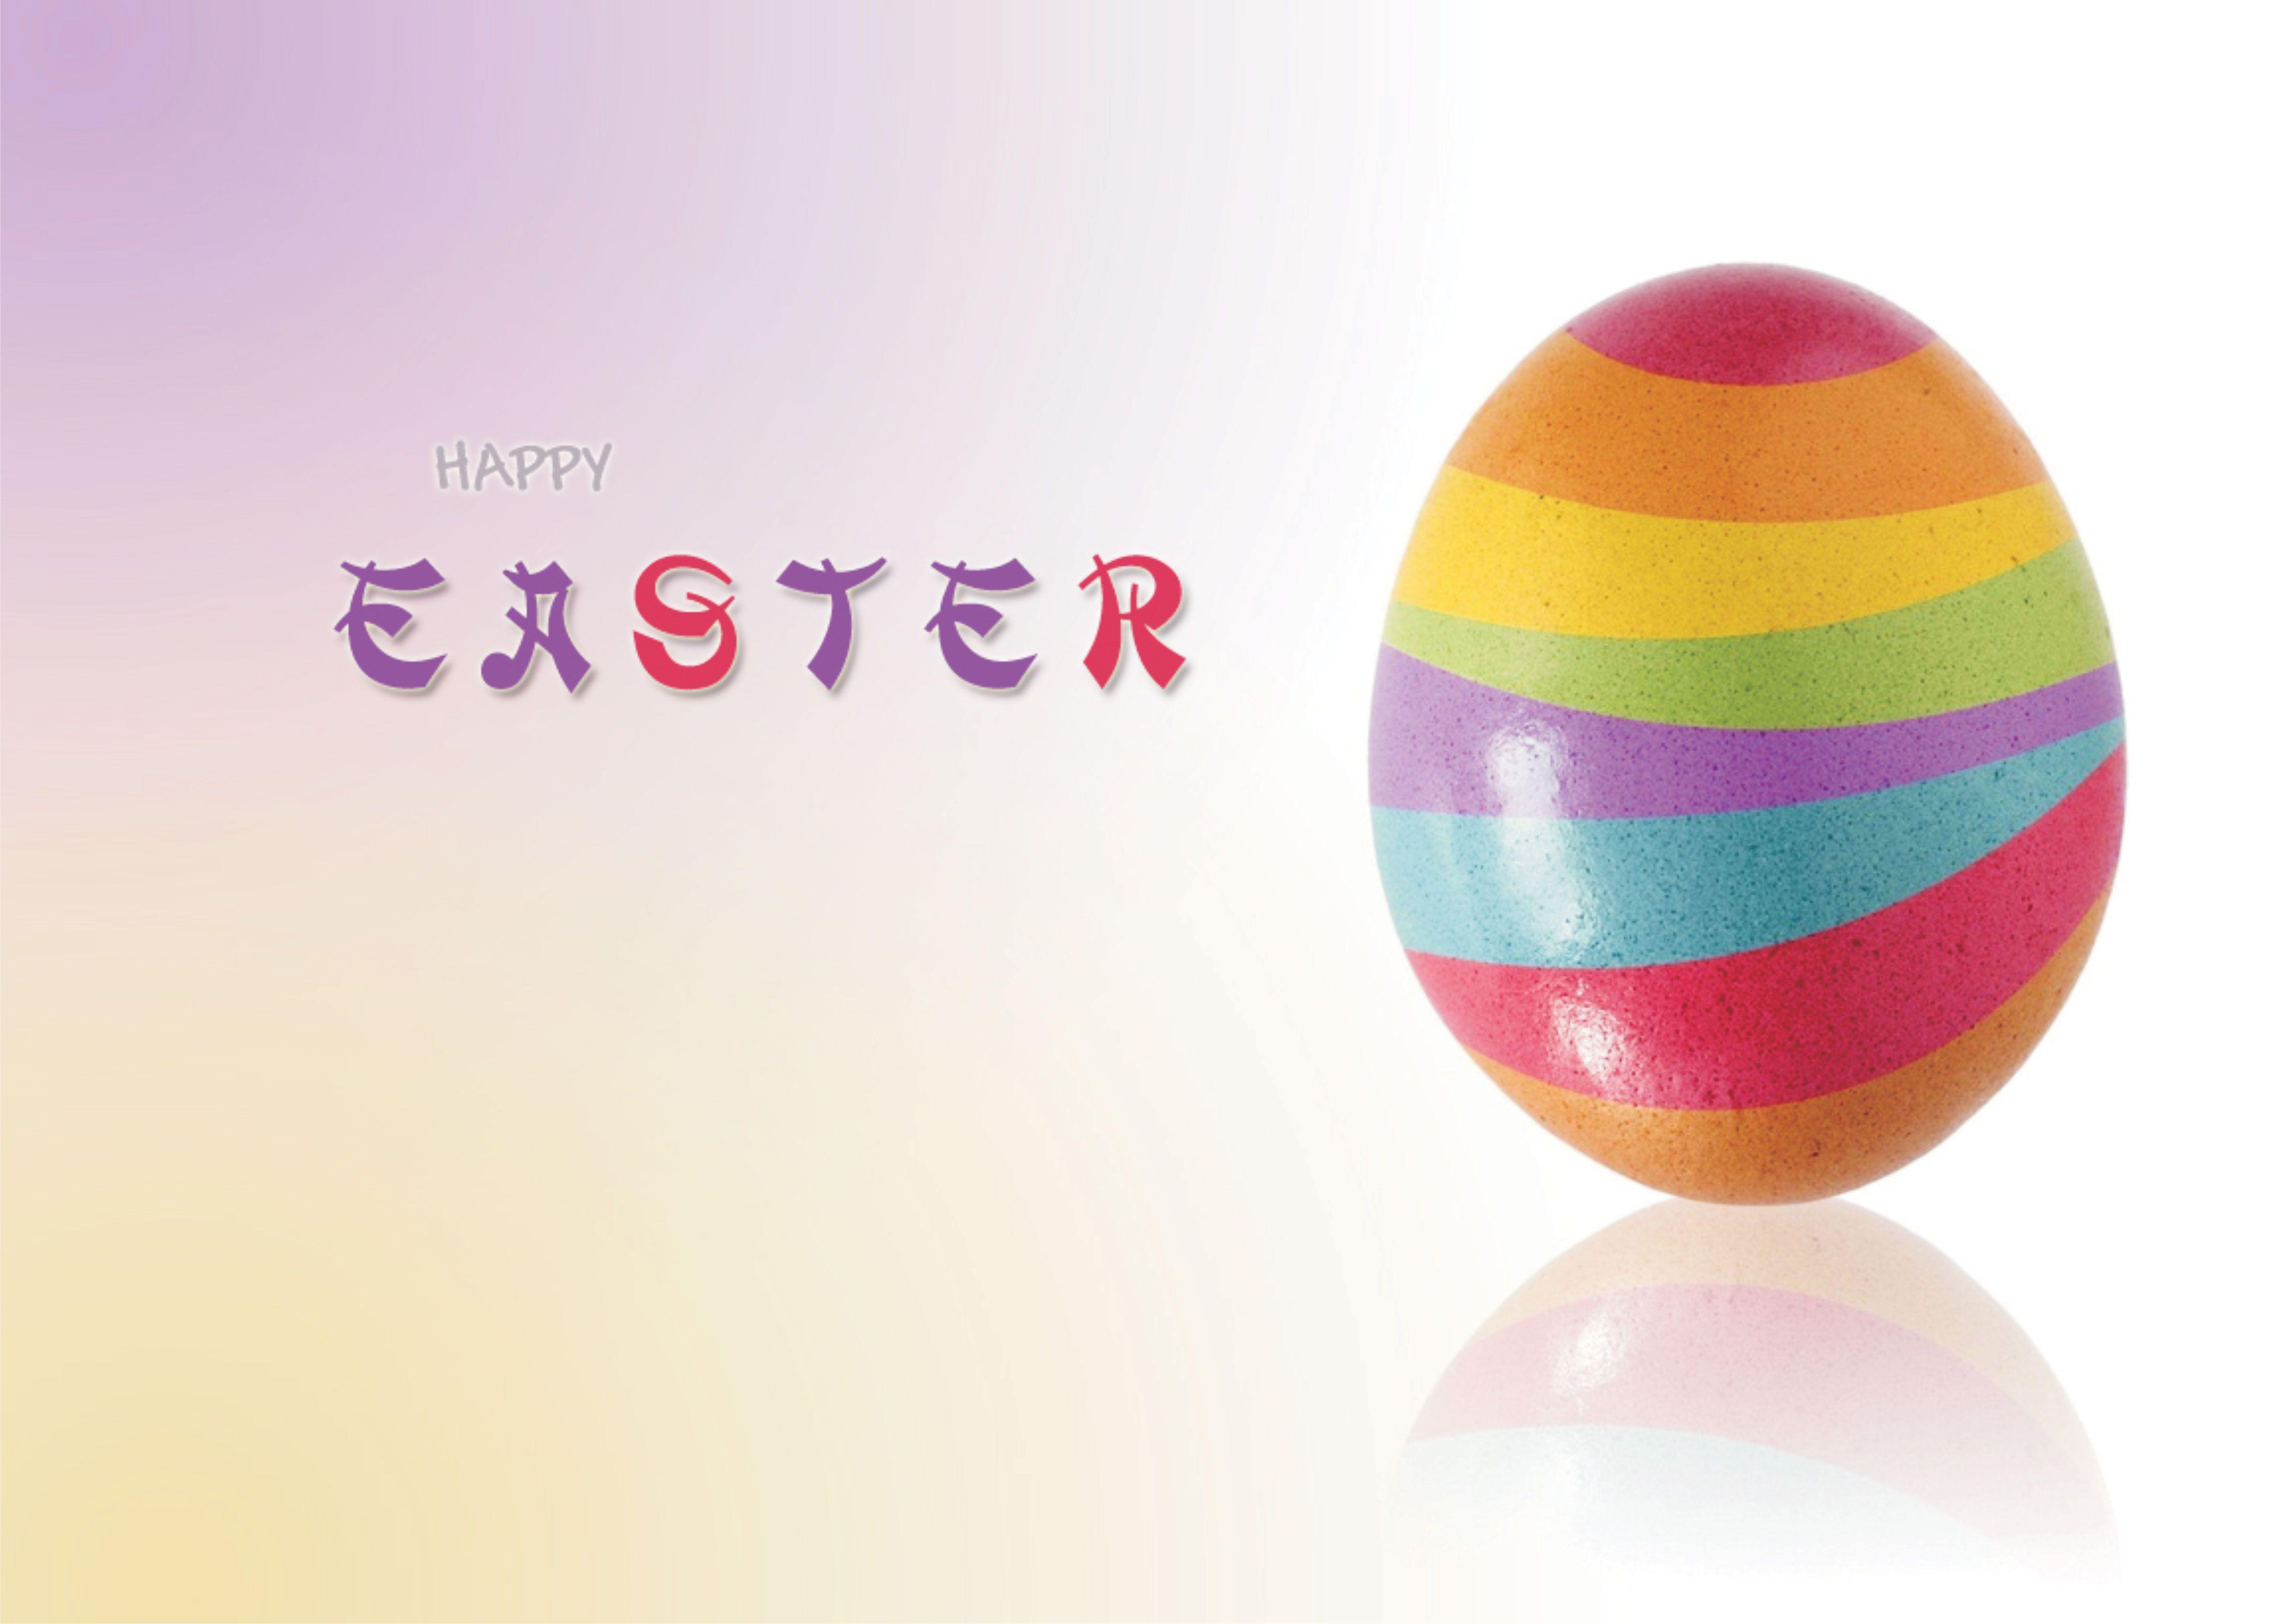 happy easter wallpaper 6 - Image And Wallpaper free to